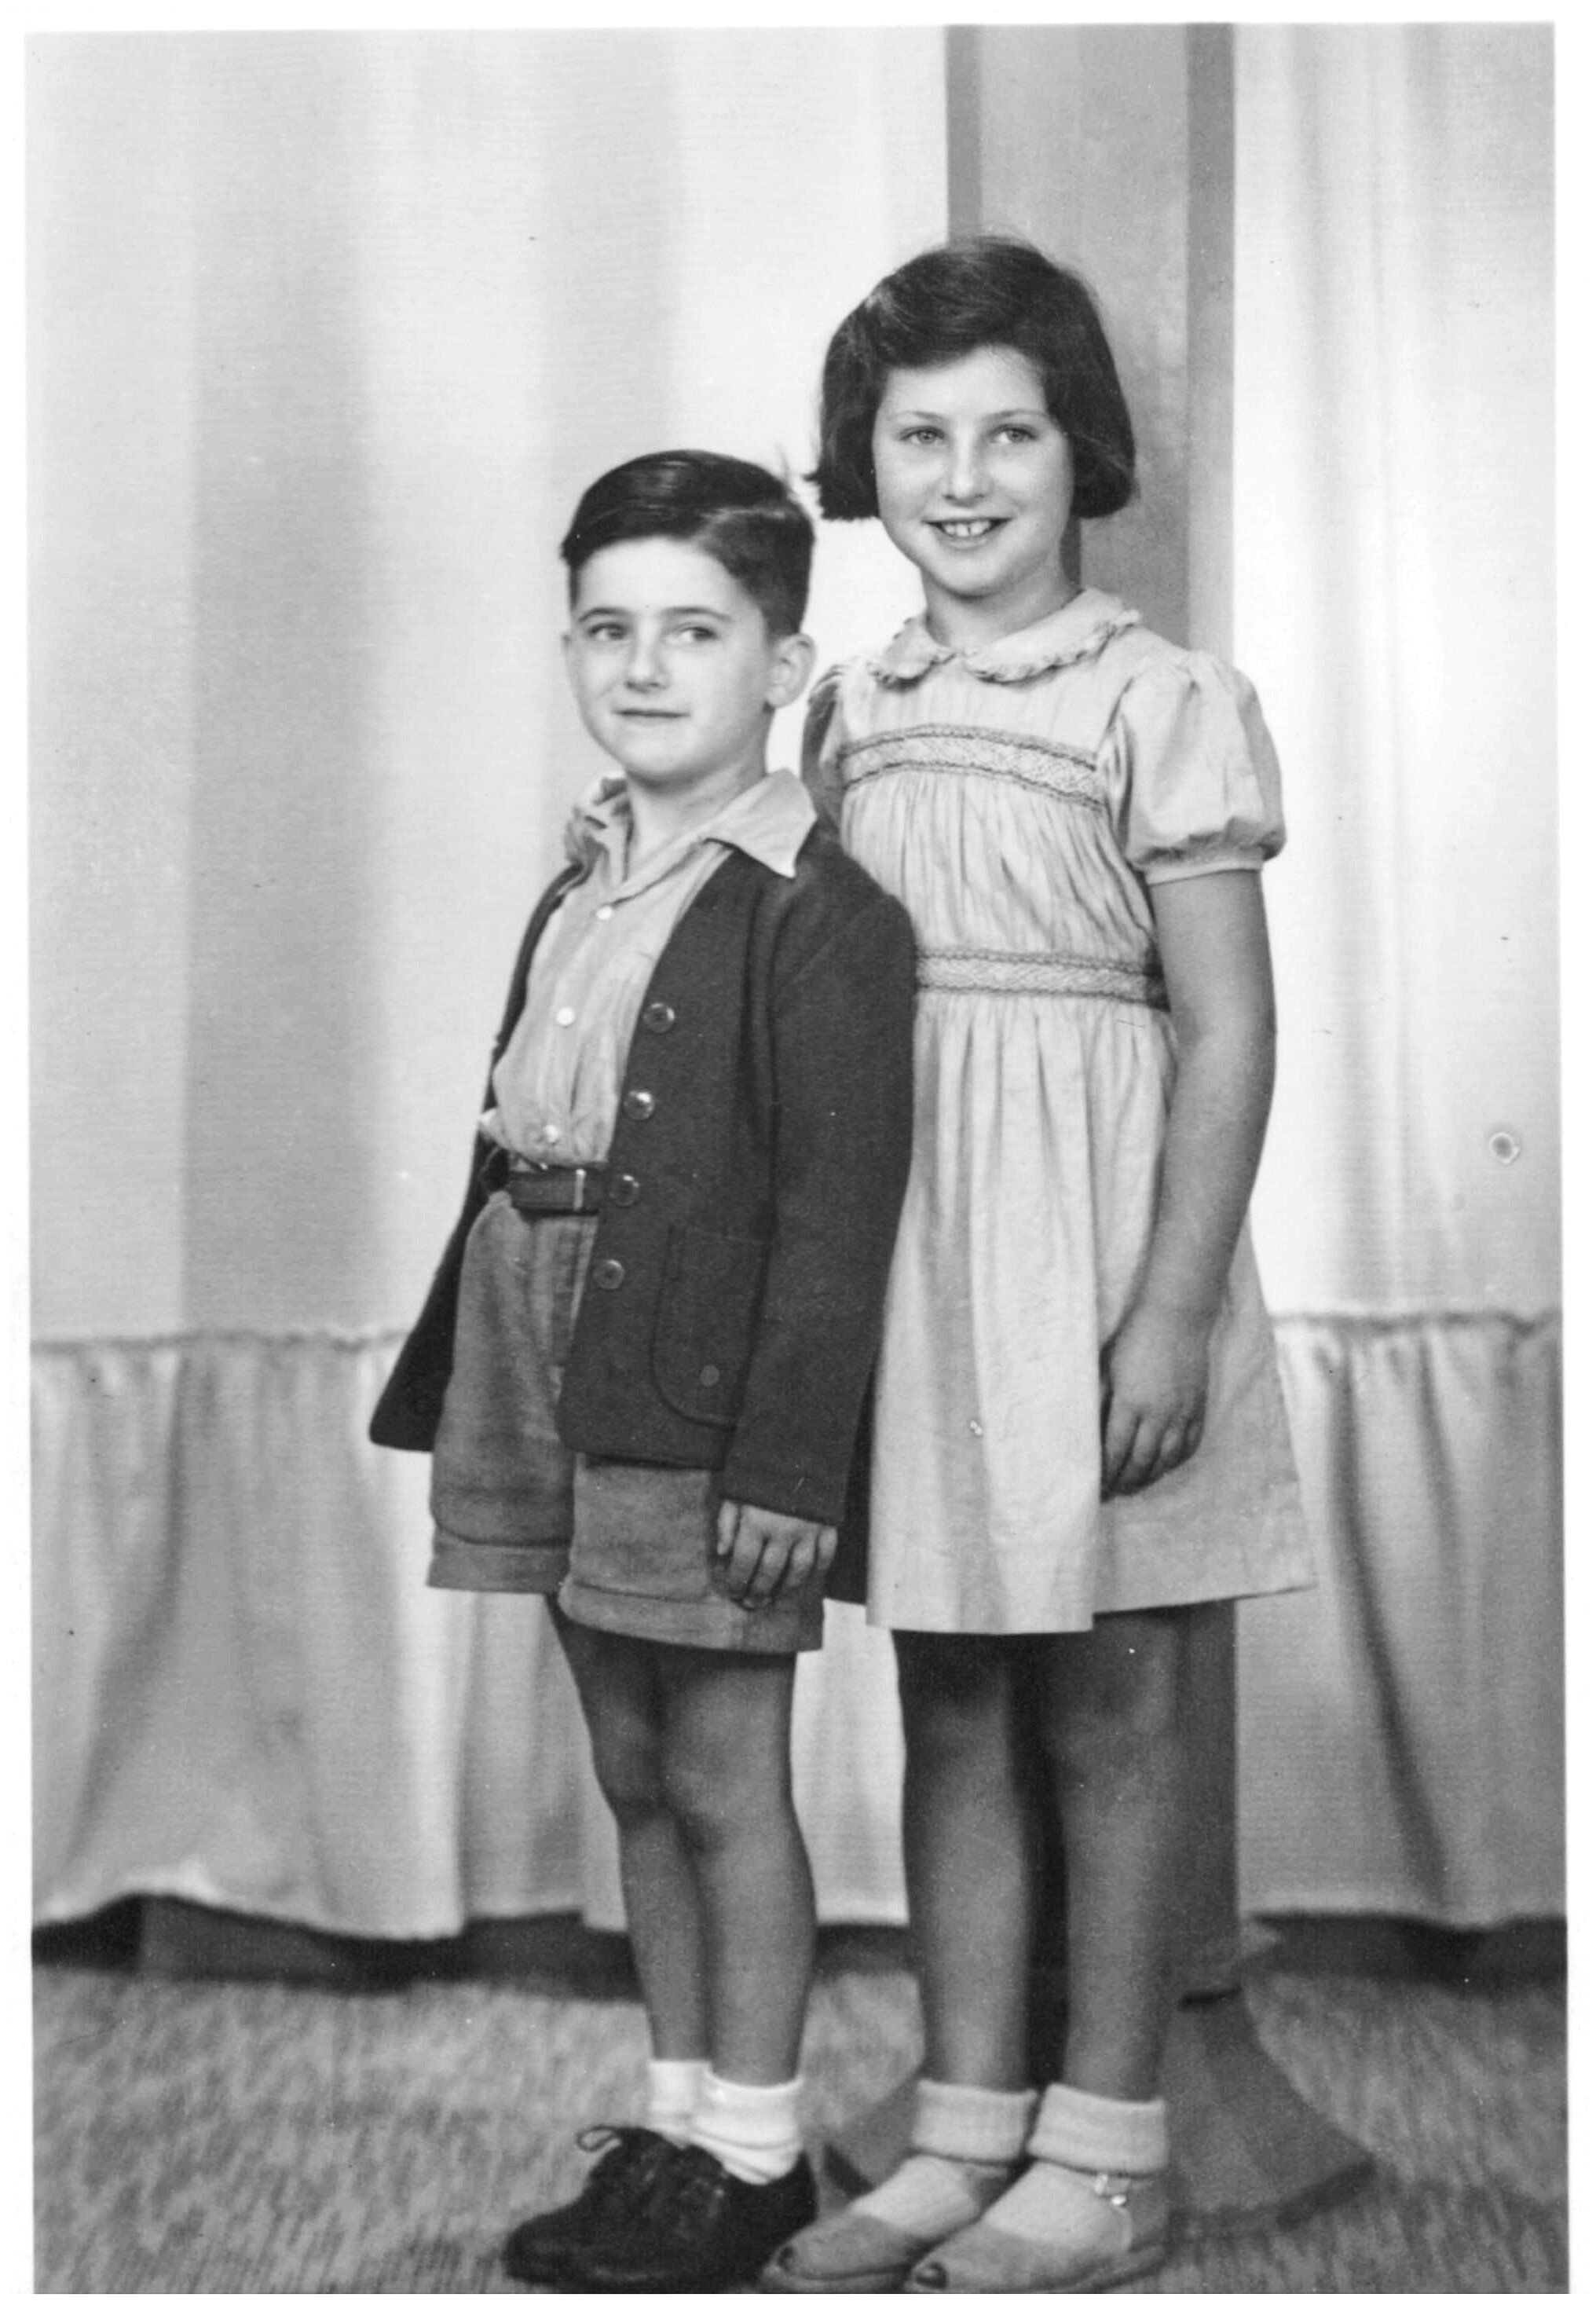 Gershon and Rita, last picture taken together before she was taken to States with paternal aunt